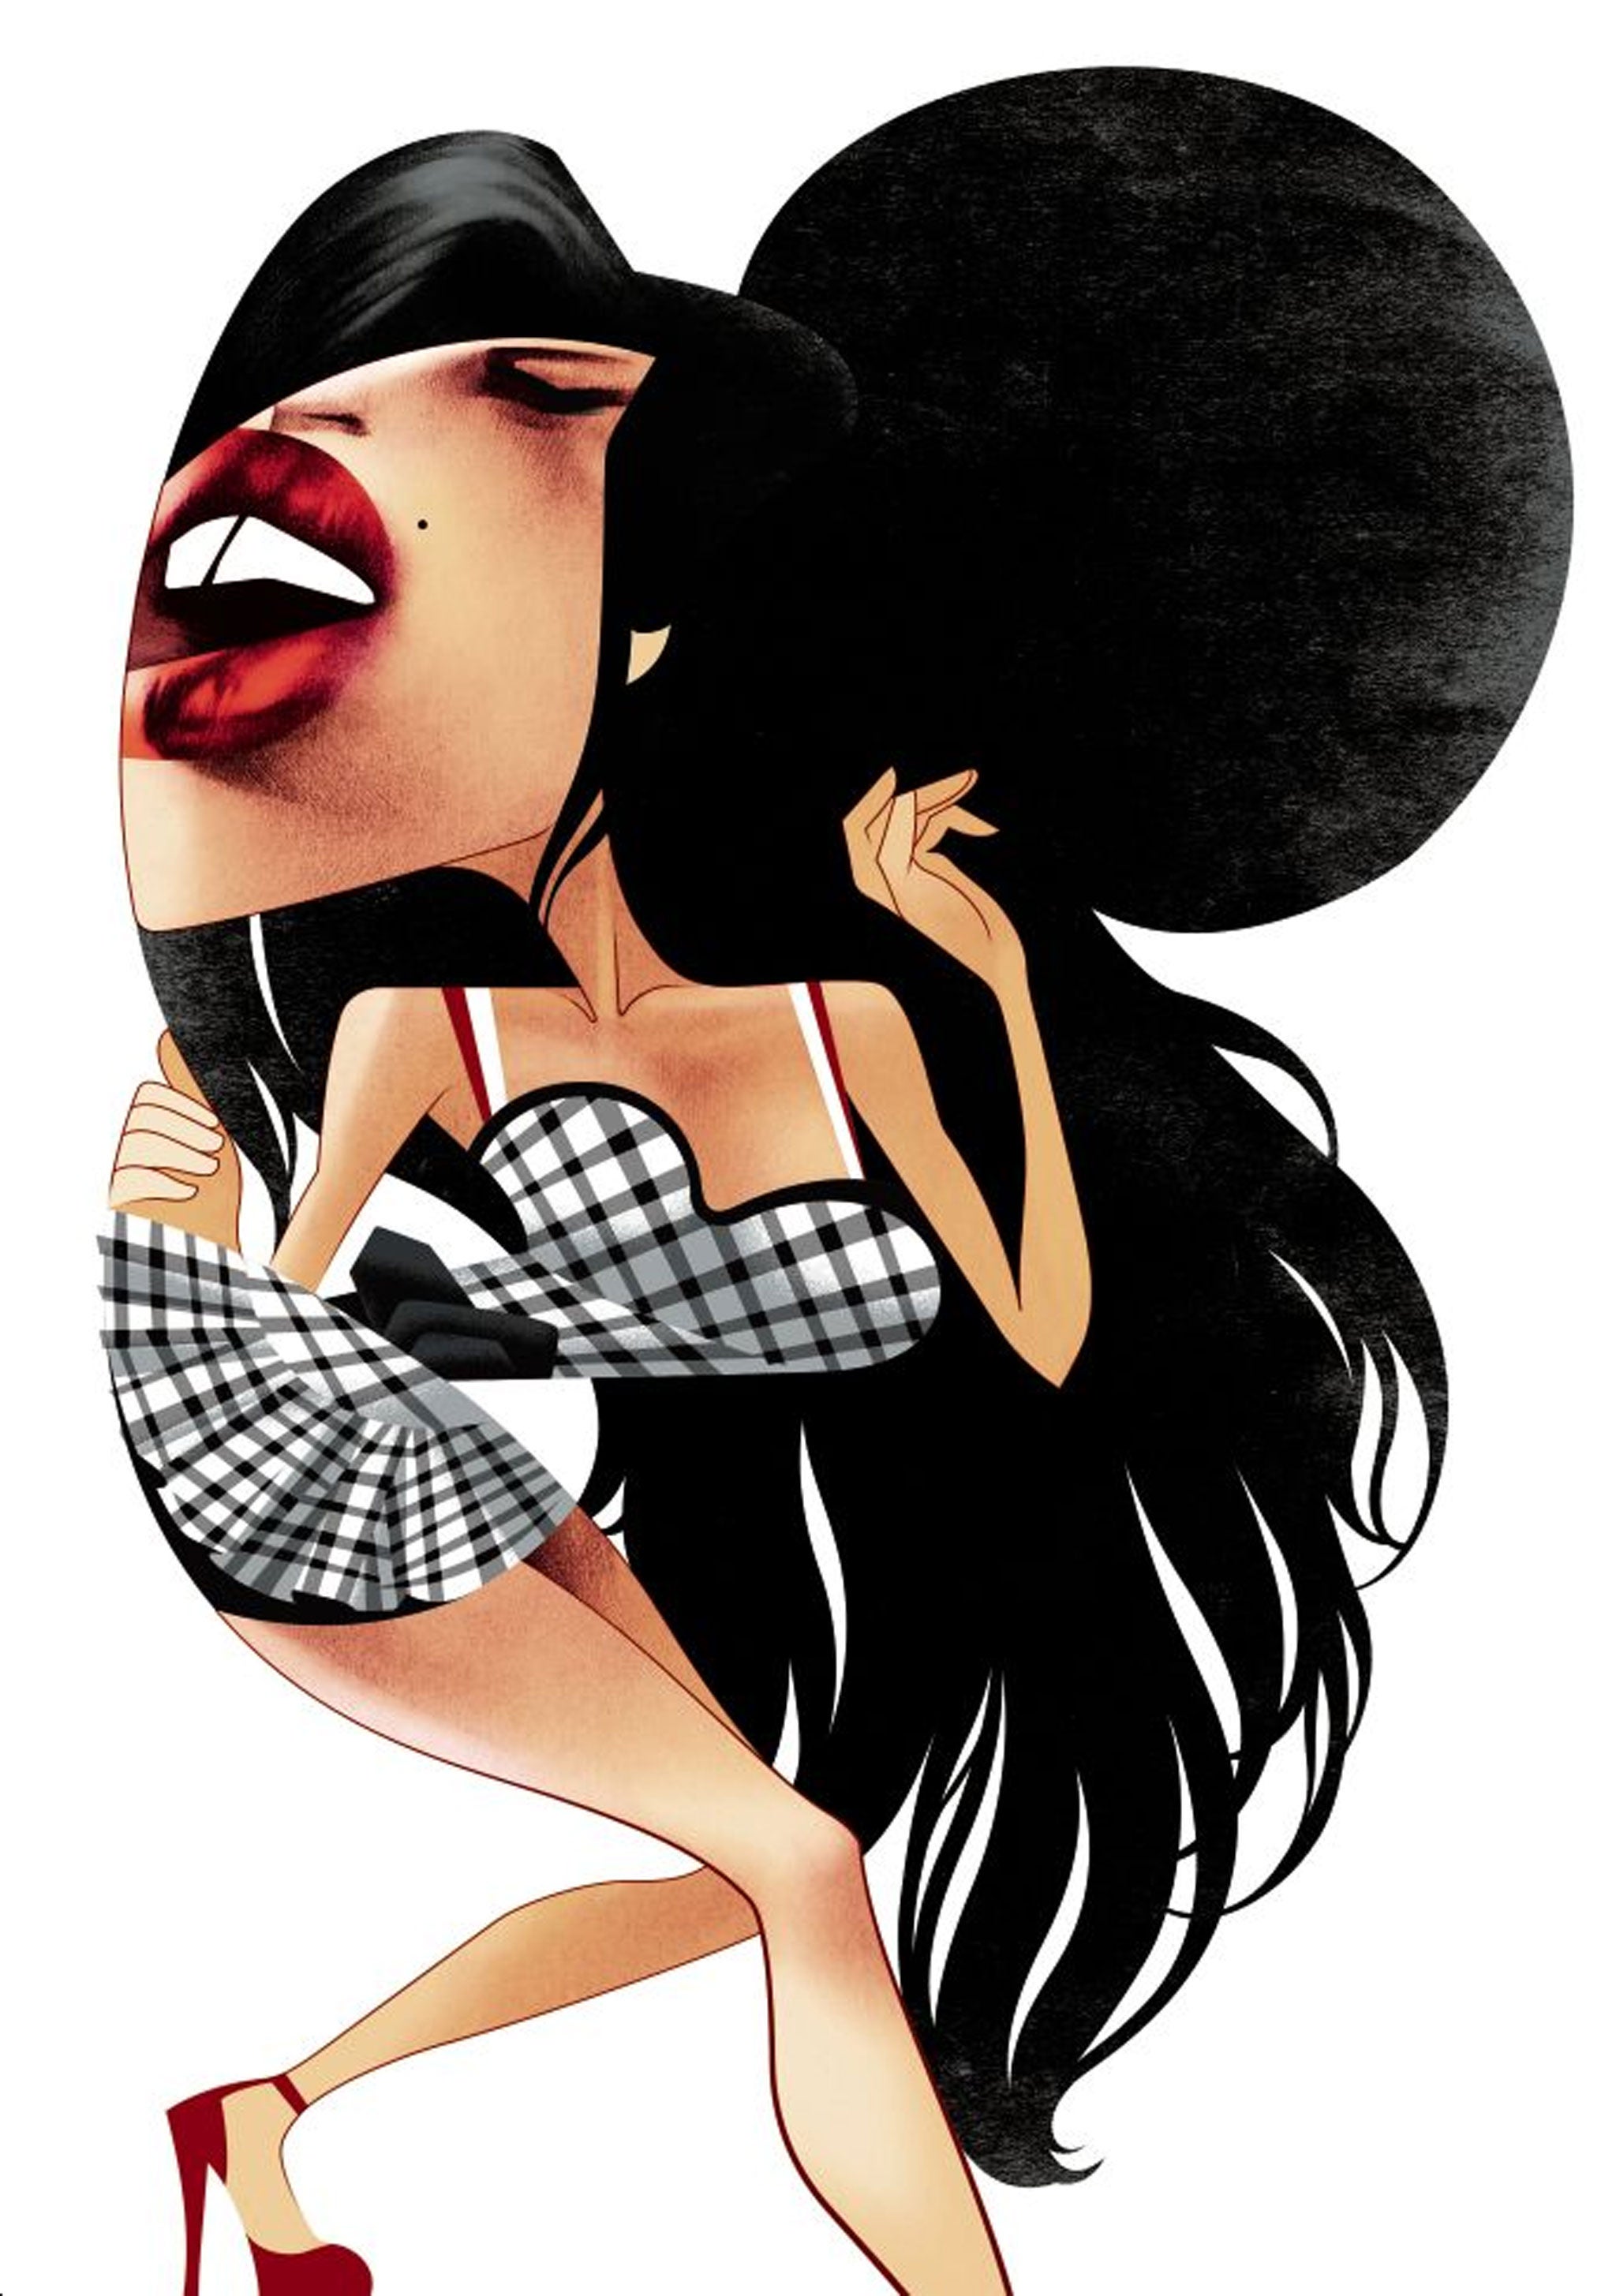 Amy Winehouse didn't live sadly and die badly because of the appetites of society but because of her own appetites